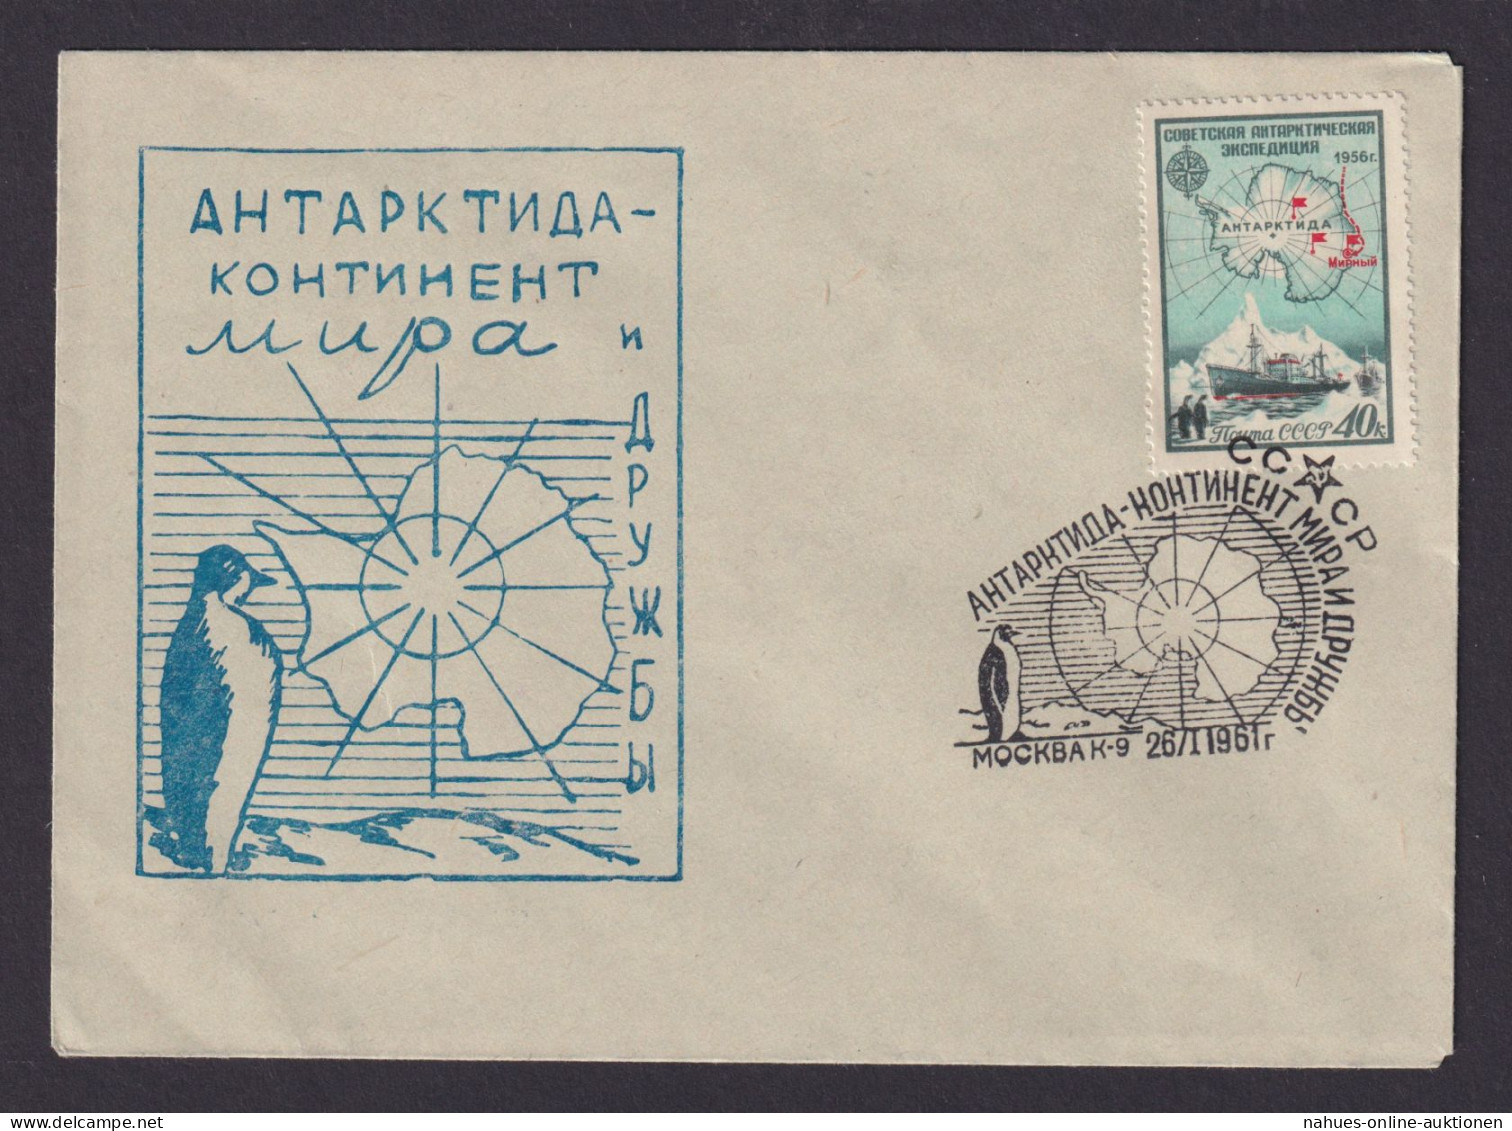 Flugpost Brief Air Mail Sowjetunion Antarktis 26.1.1961 - Covers & Documents